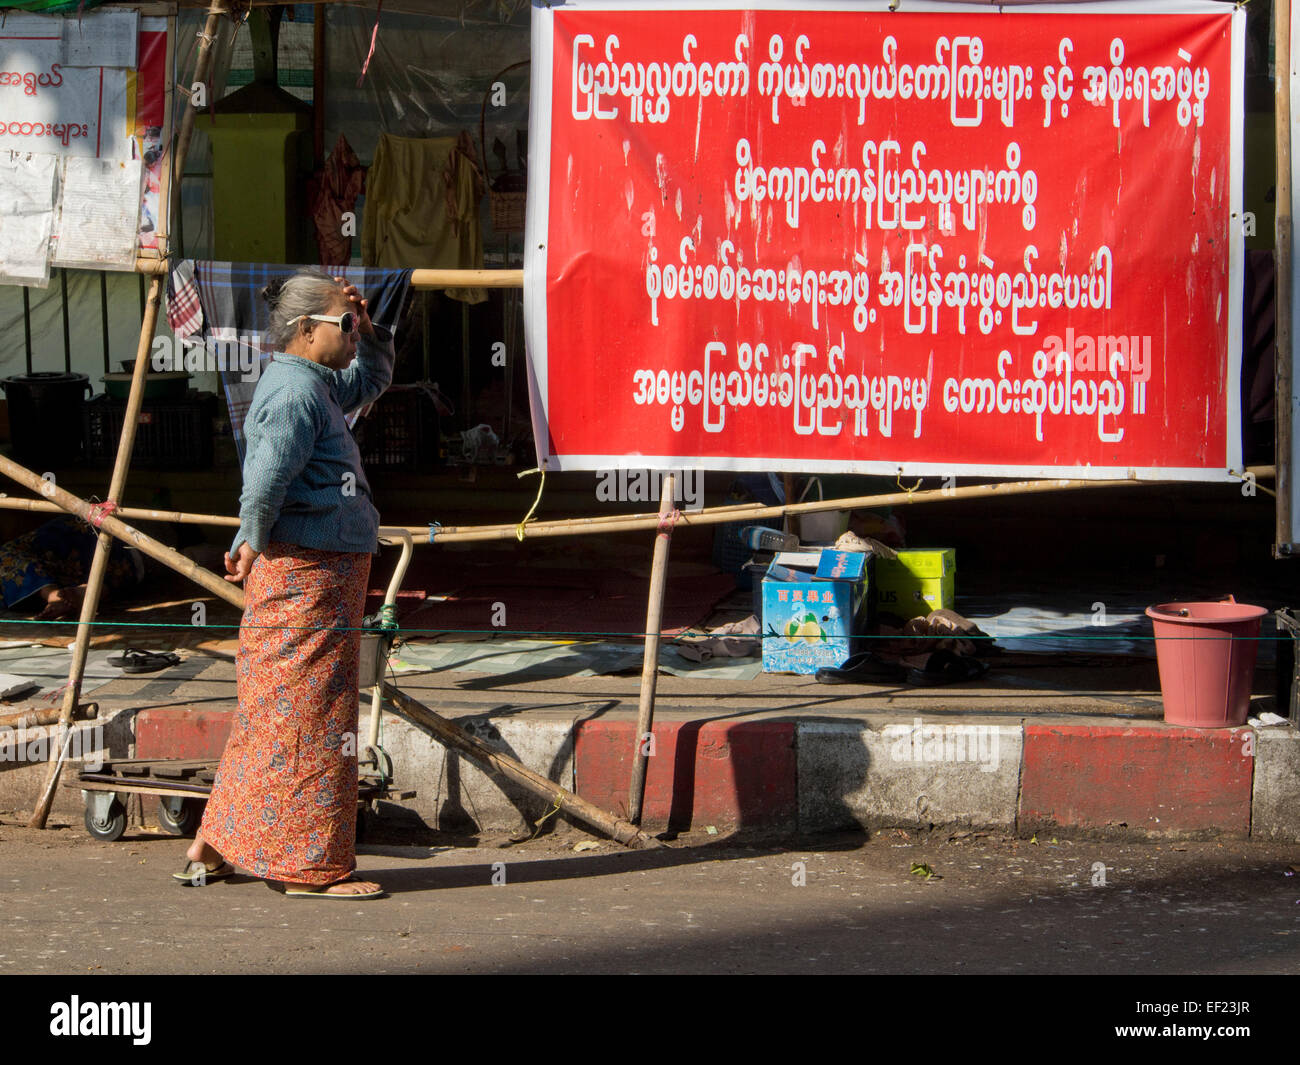 Local residents protest against land disputes in Yangon, Myanmar Stock Photo